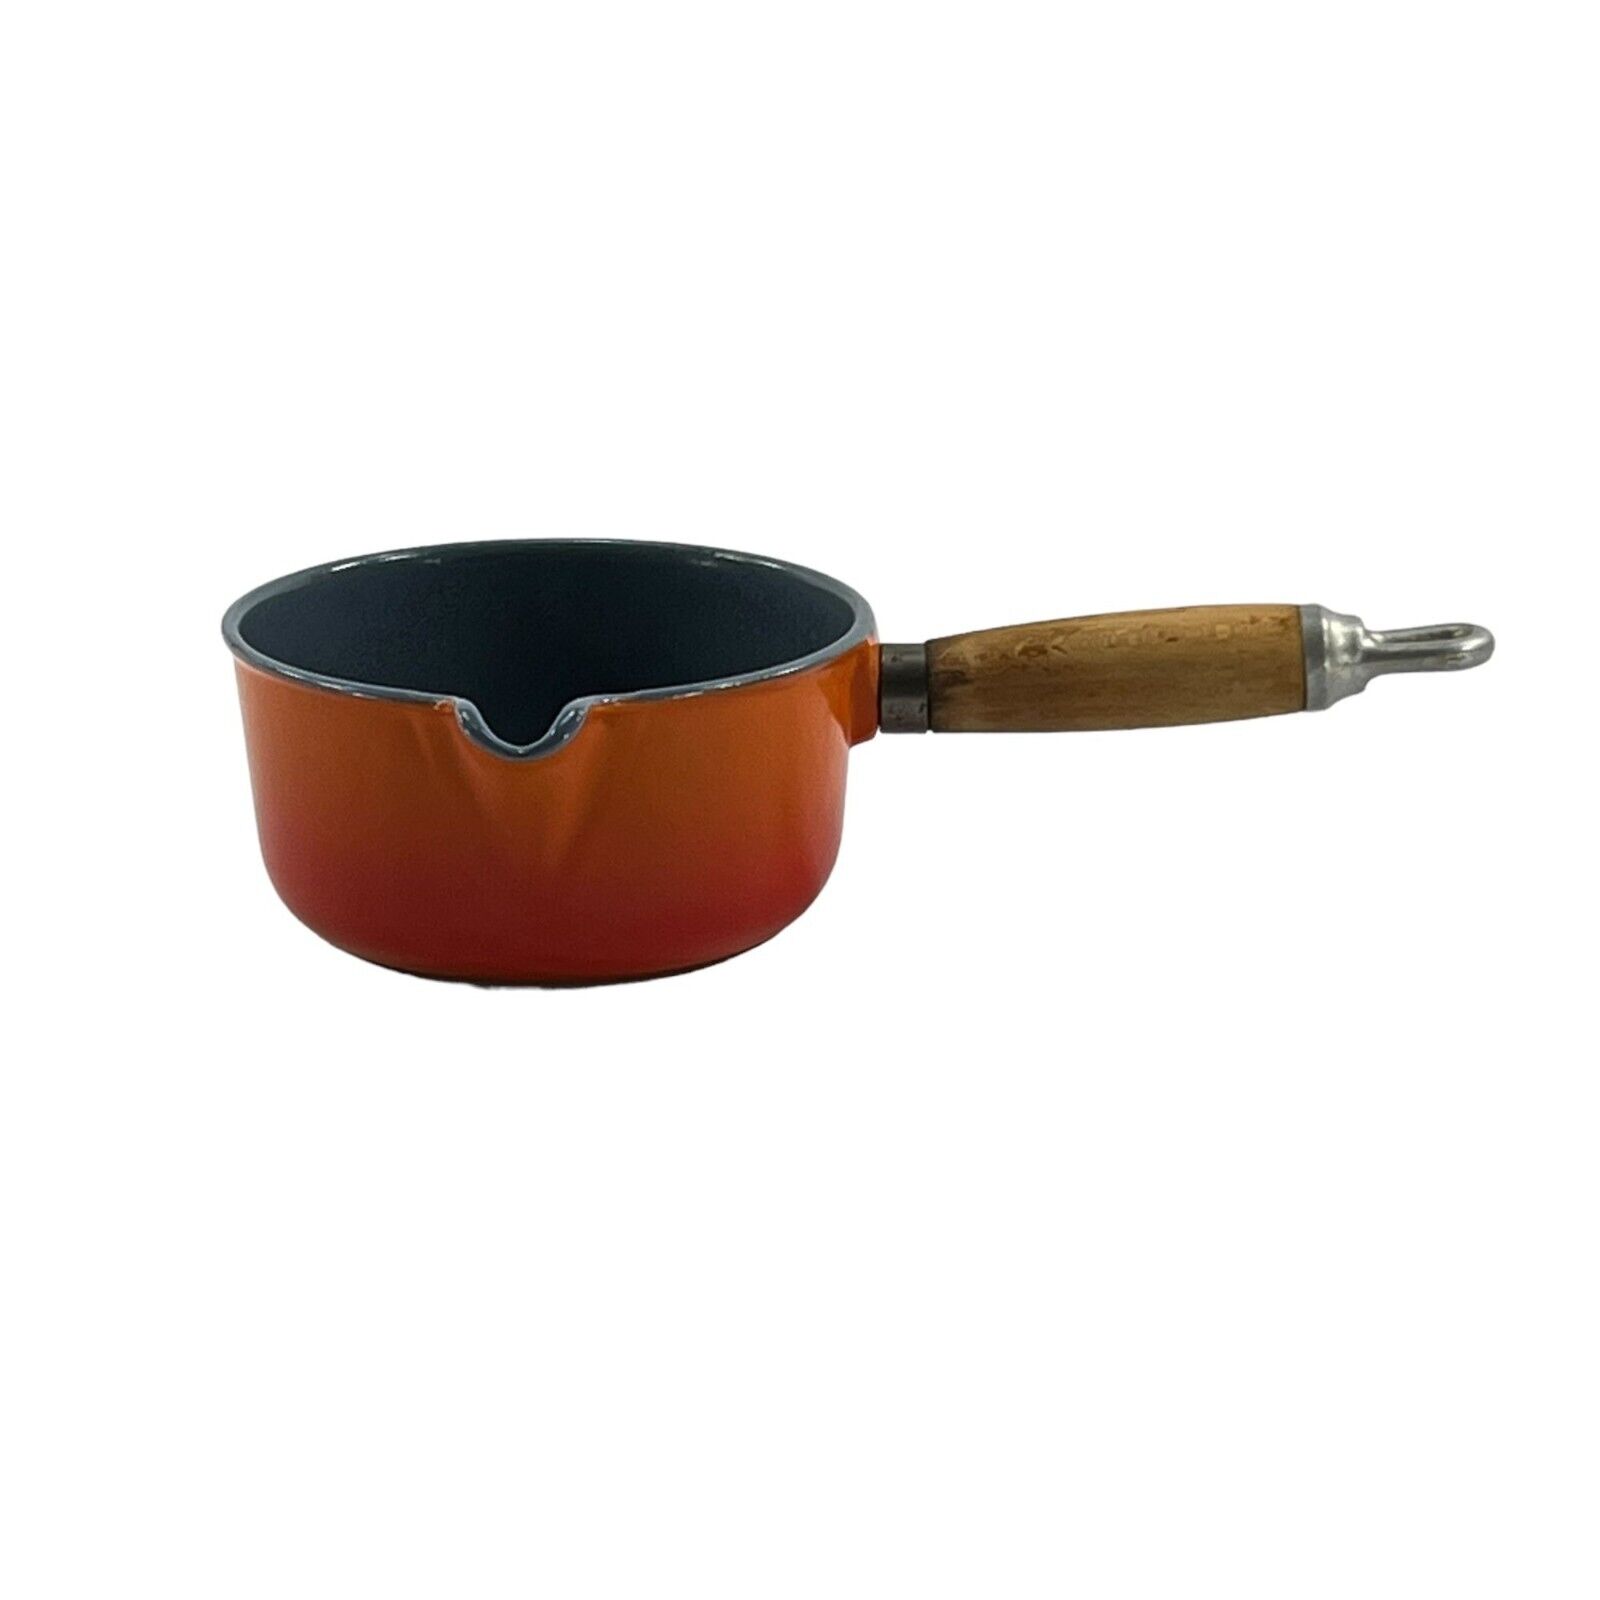 Flame Cast Iron Saucepan with Pour Spout Vintage Made in Belgium Wood Handle